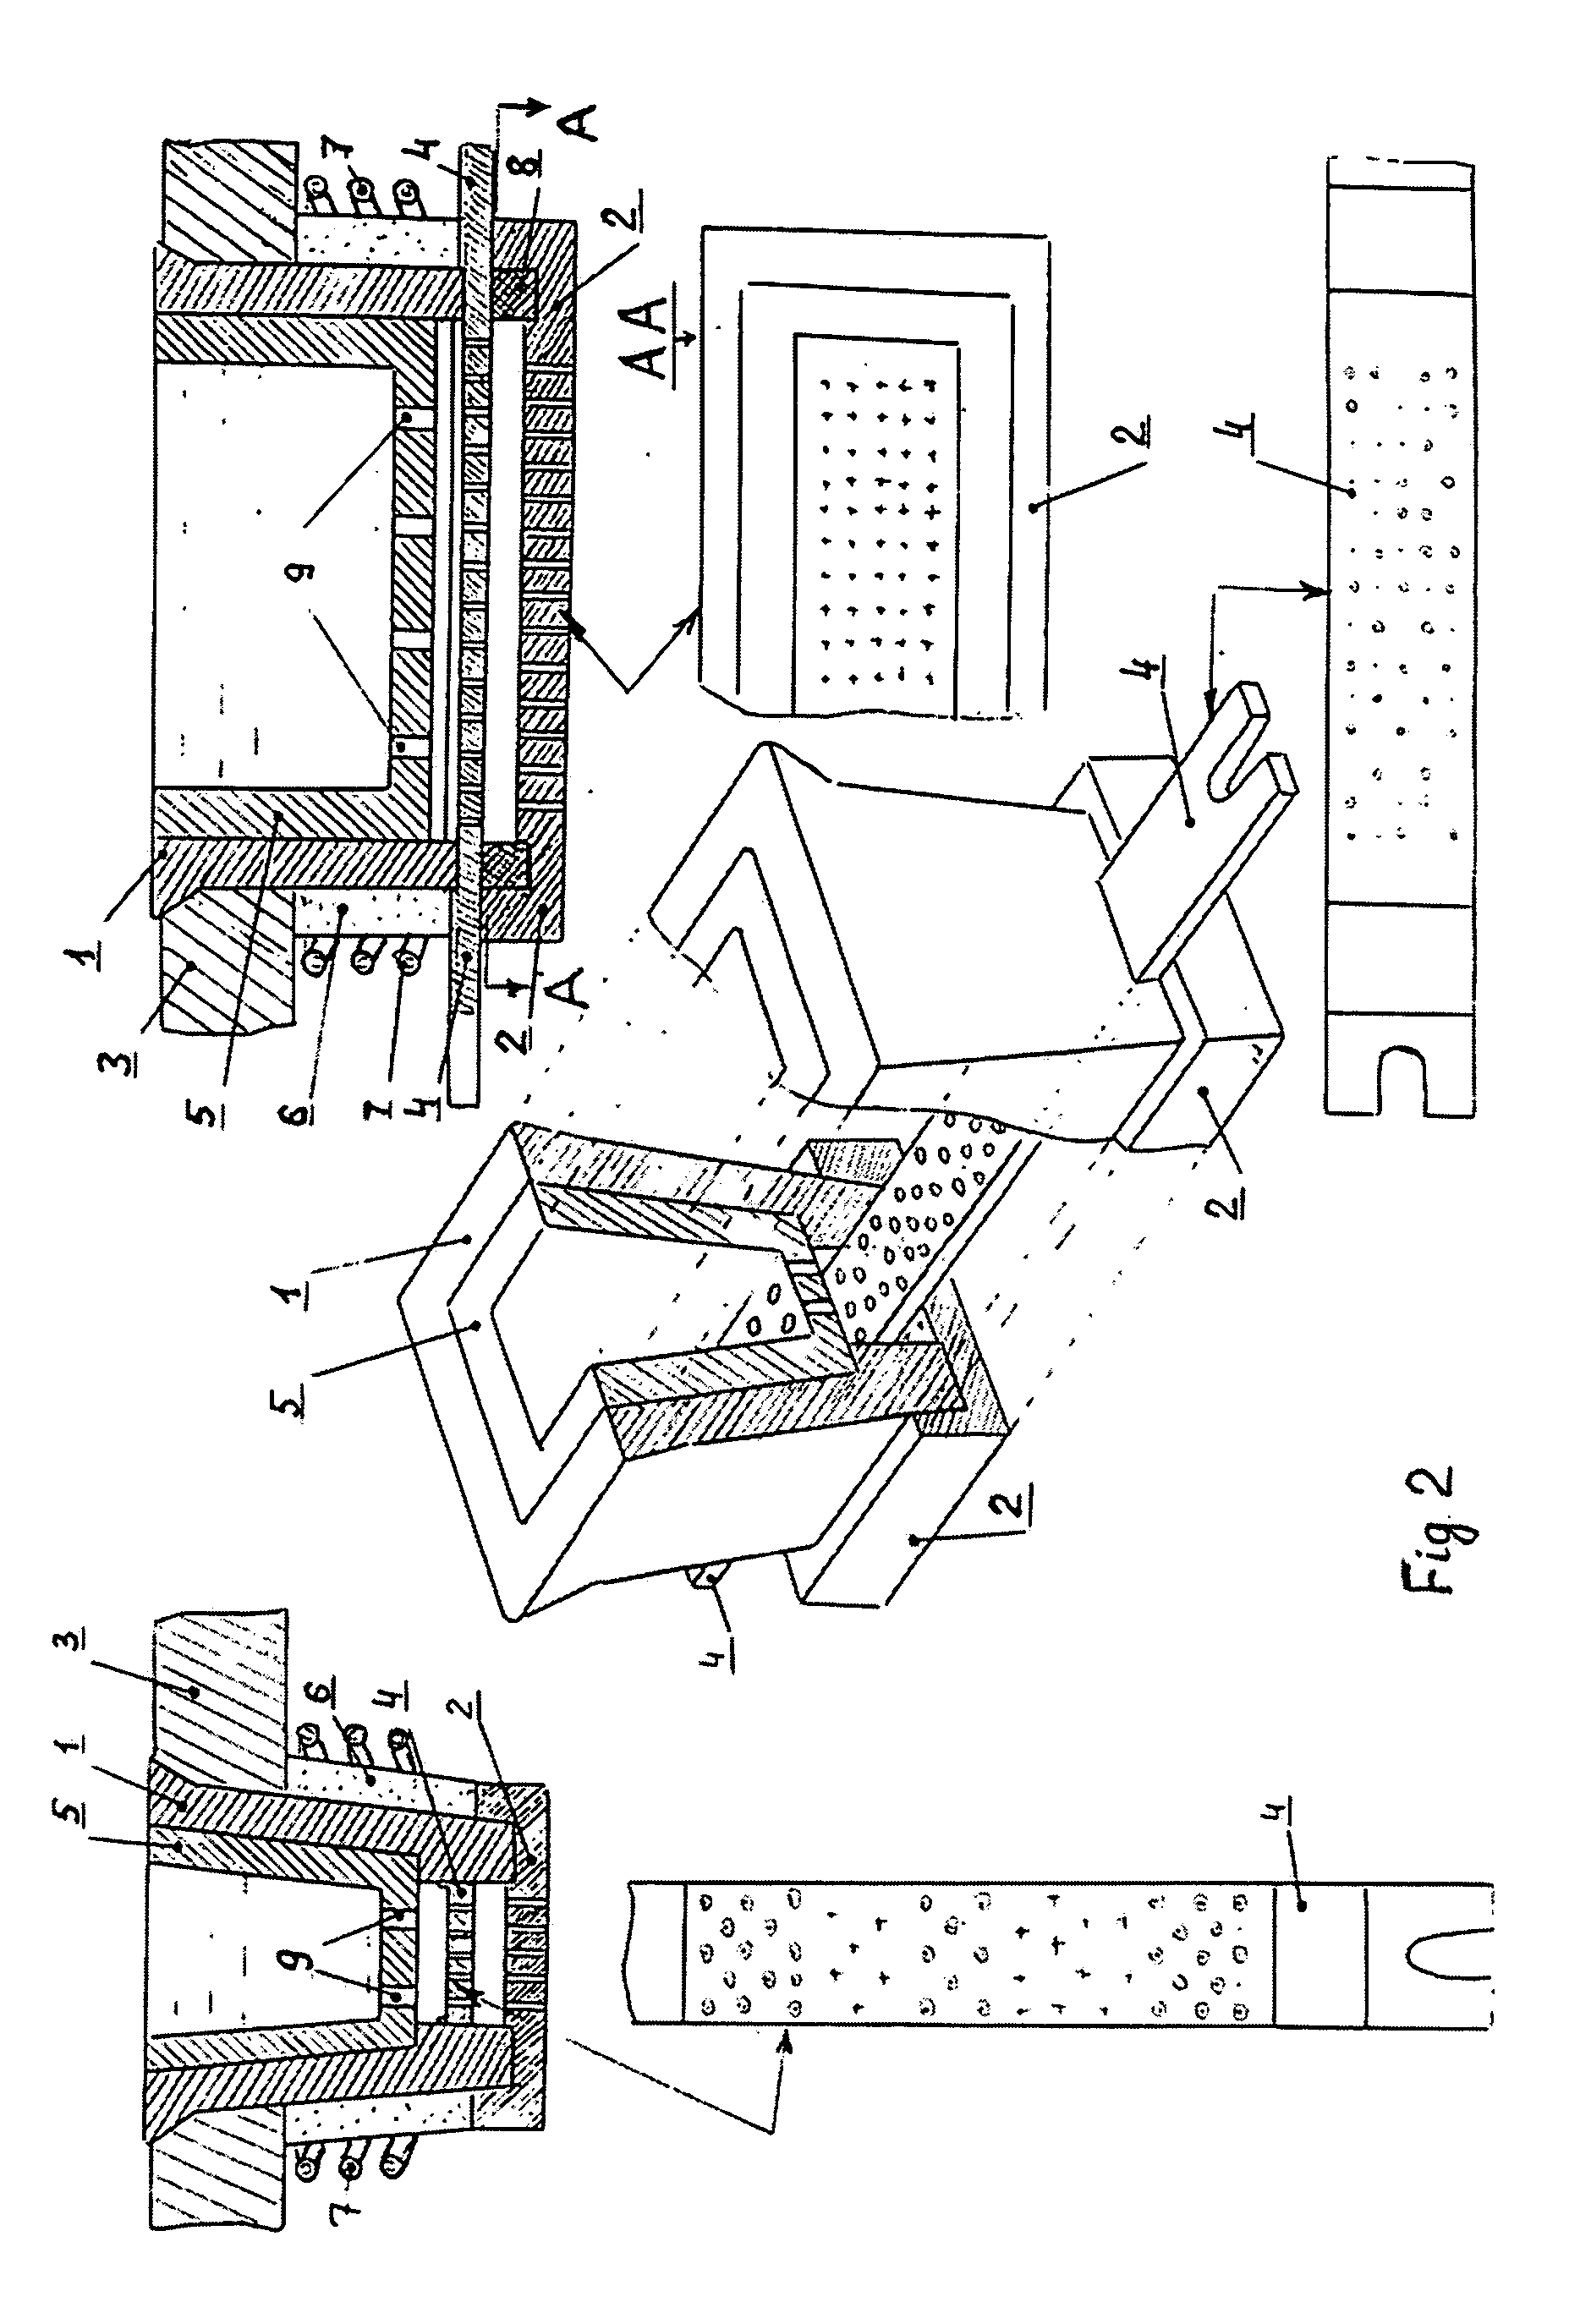 Apparatus integrated with ceramic bushing for manufacturing mineral/basalt fibers